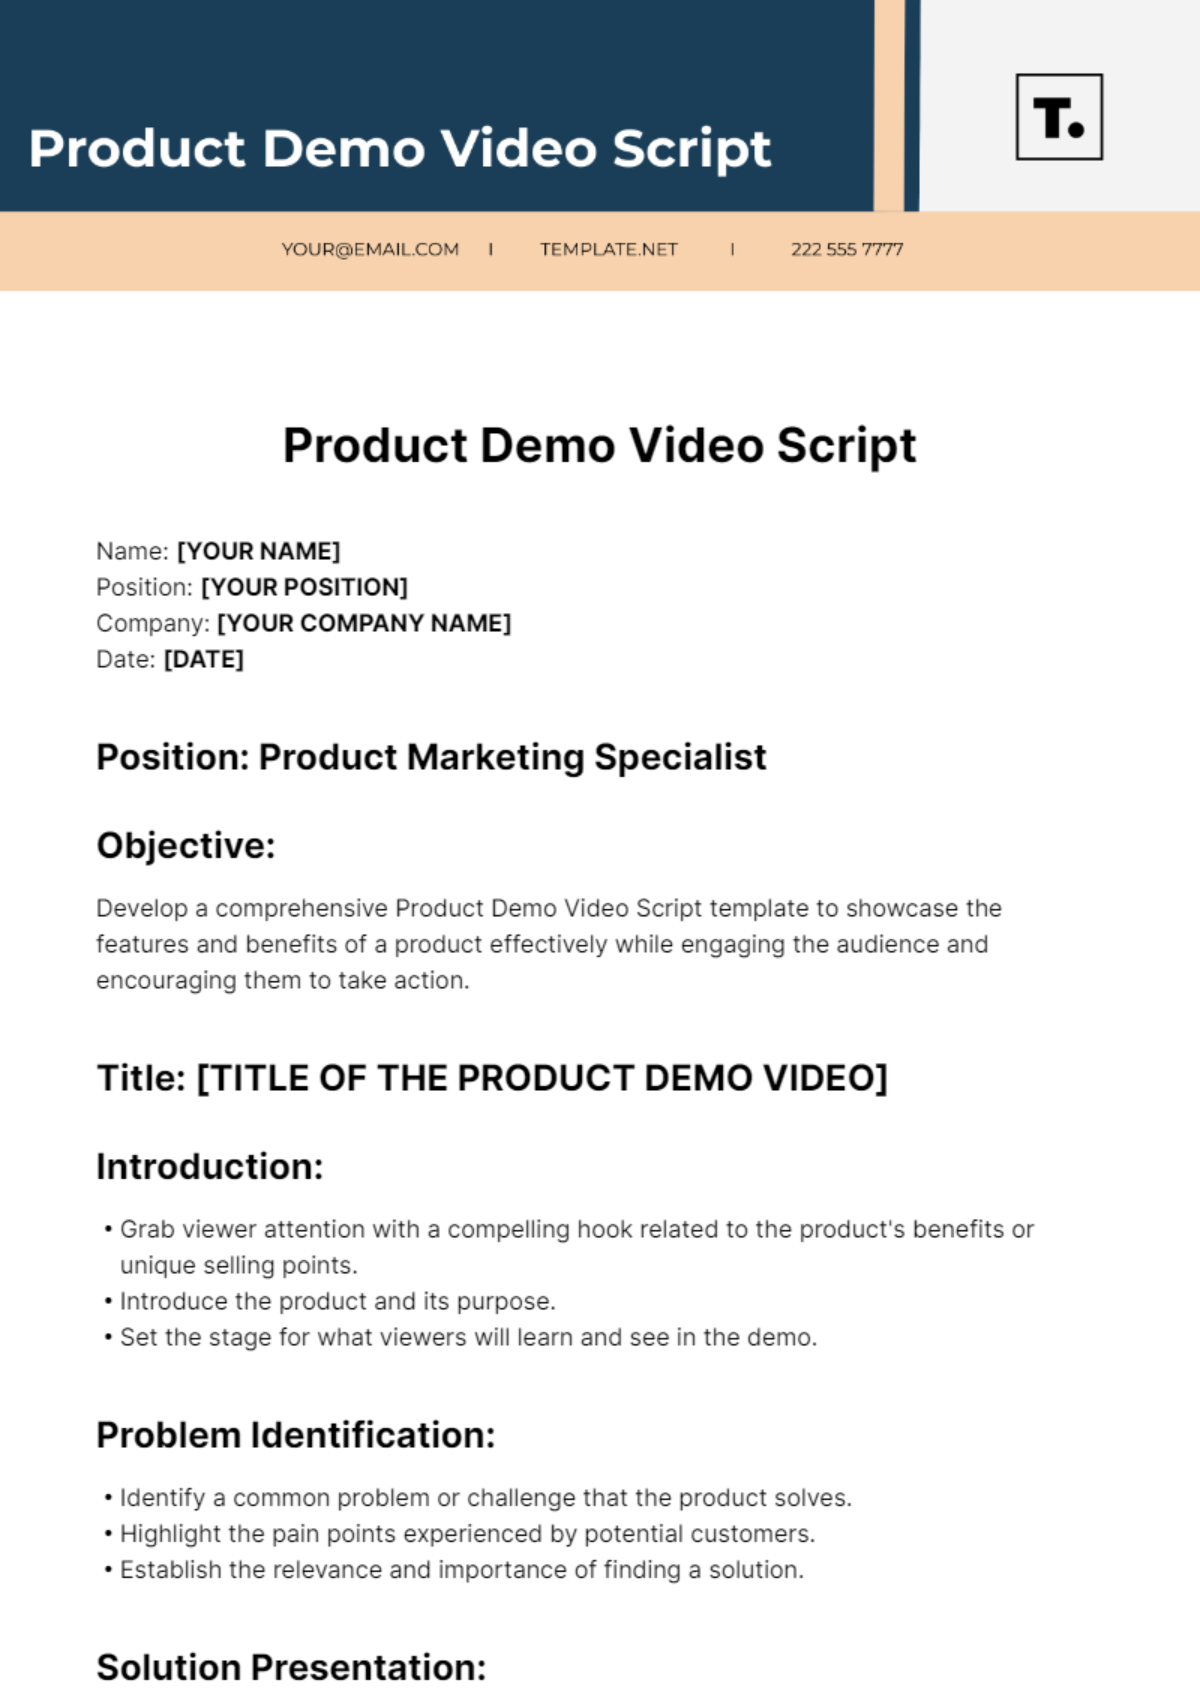 Free Product Demo Video Script template